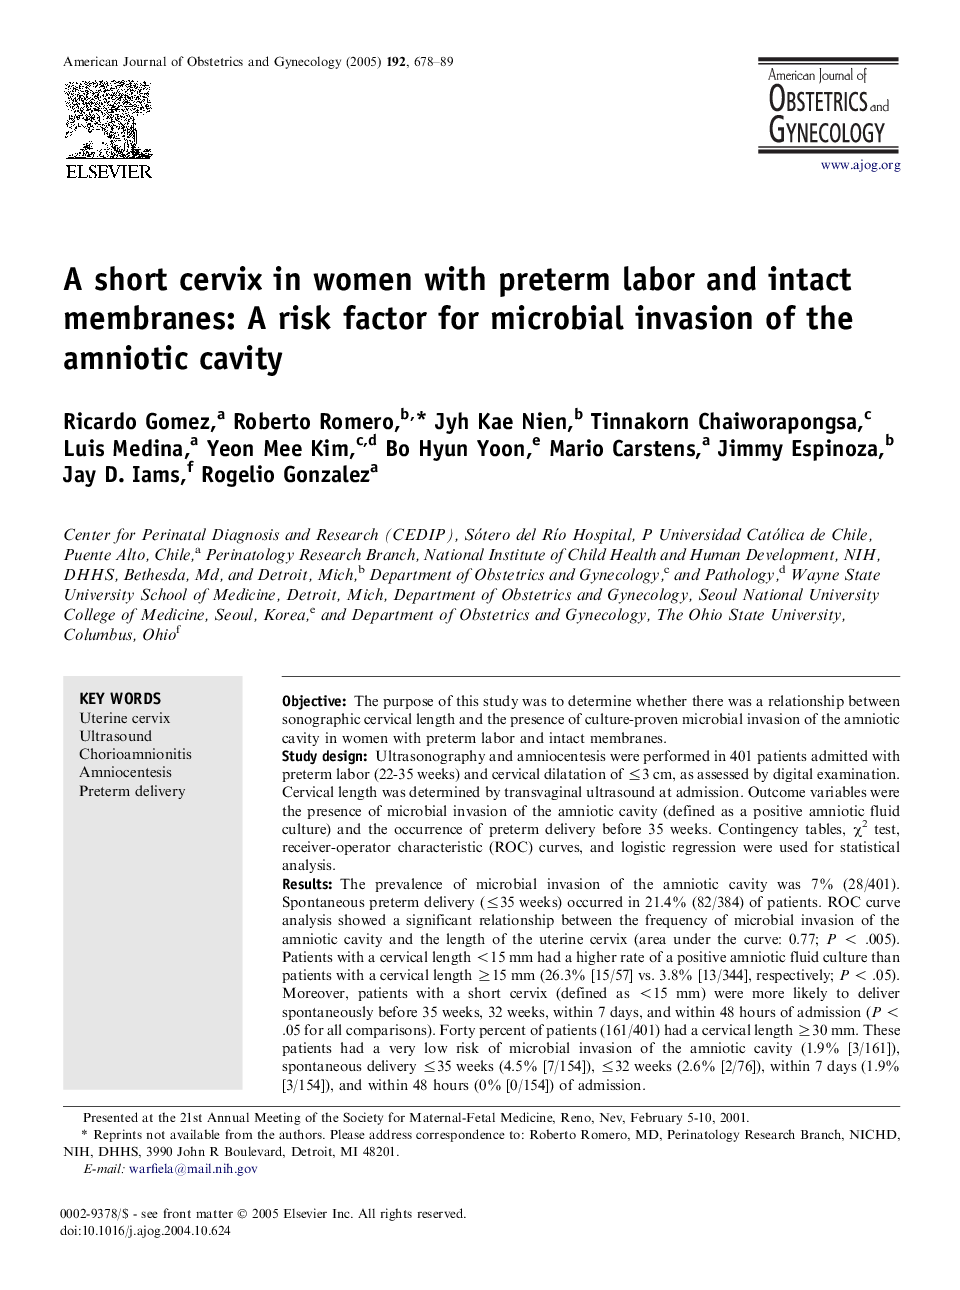 A short cervix in women with preterm labor and intact membranes: A risk factor for microbial invasion of the amniotic cavity